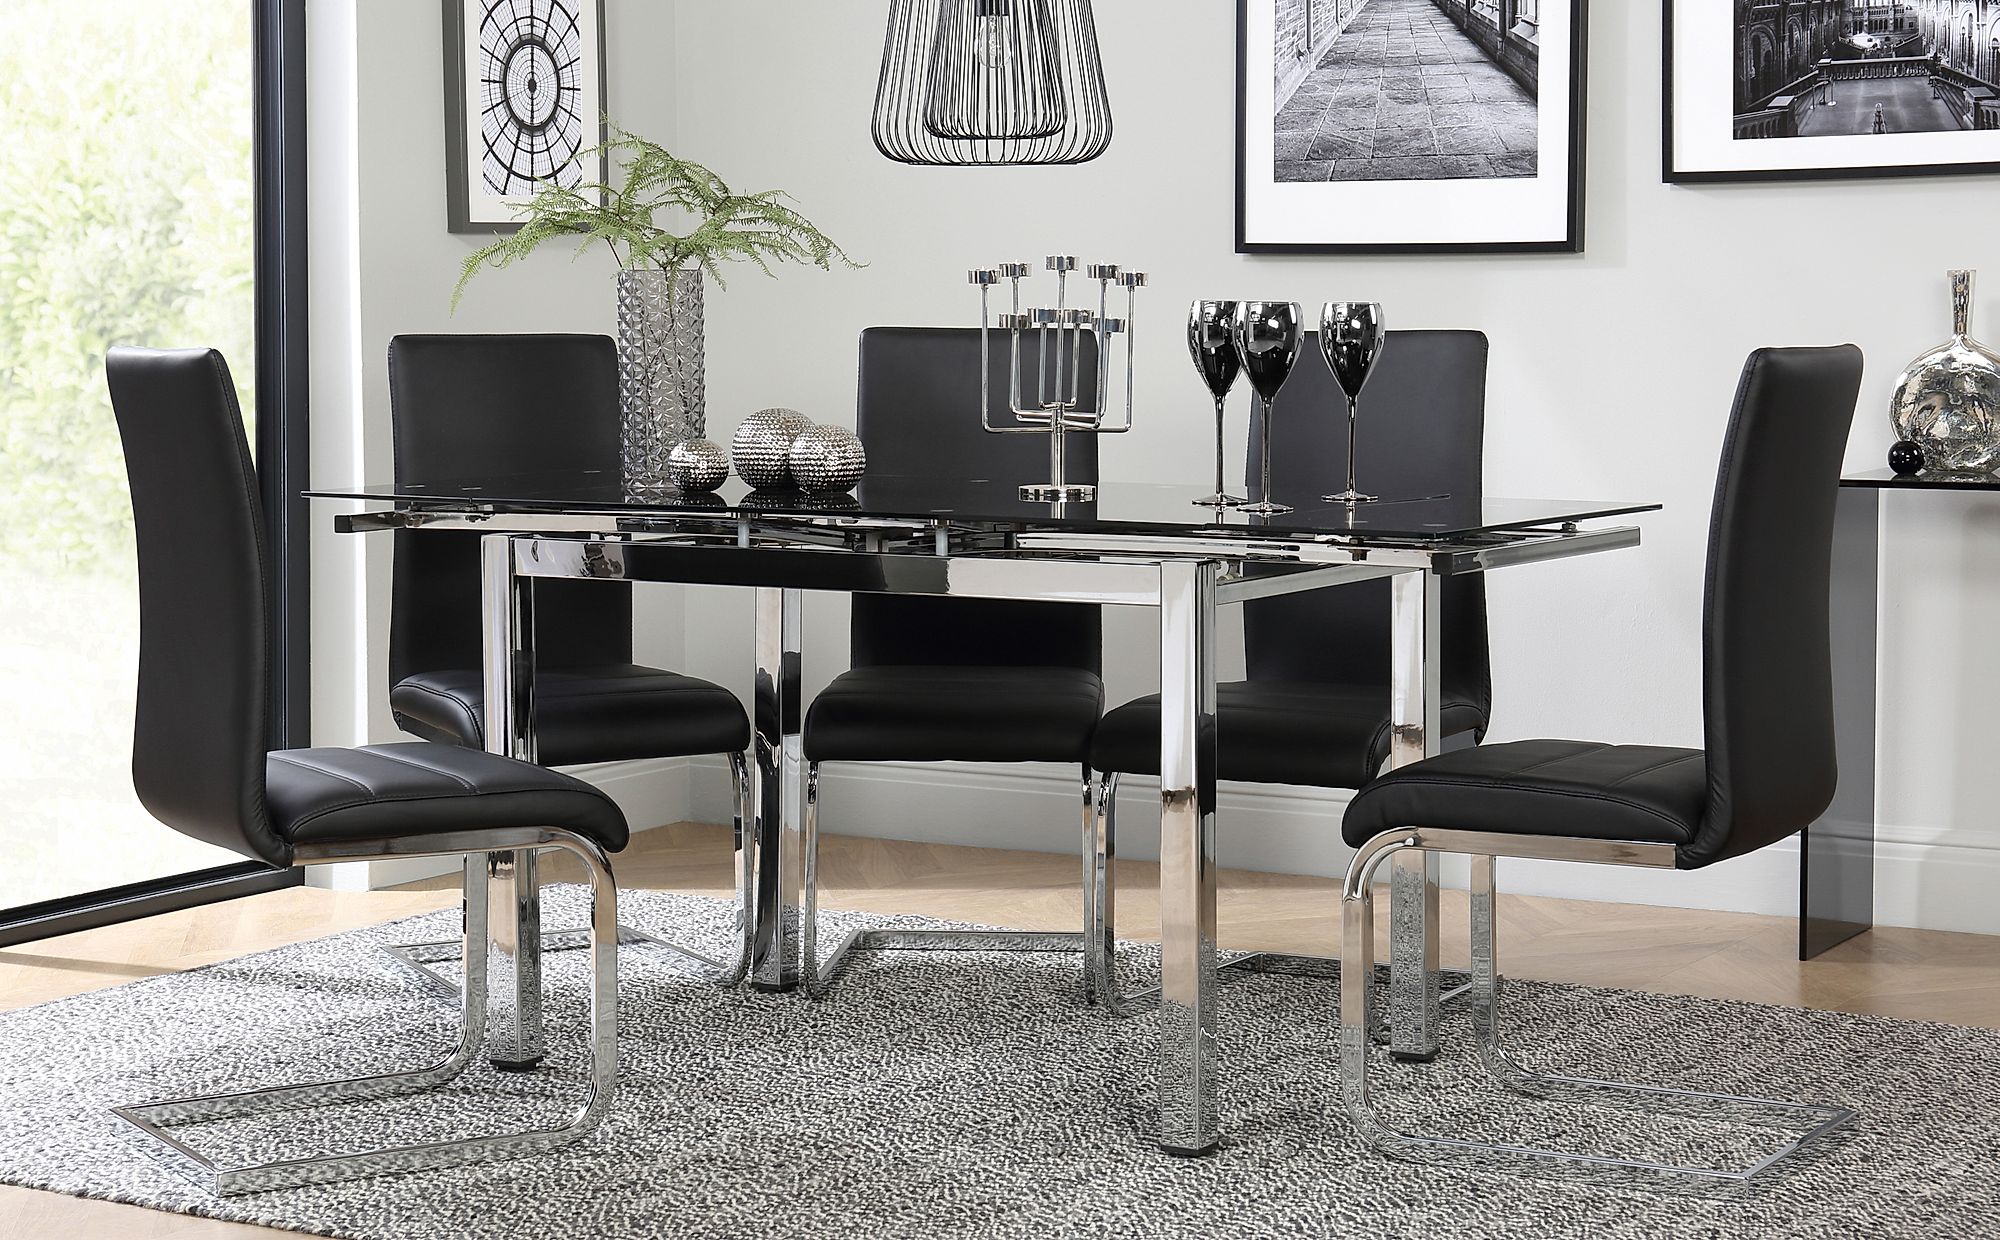 black kitchen dining table and chair